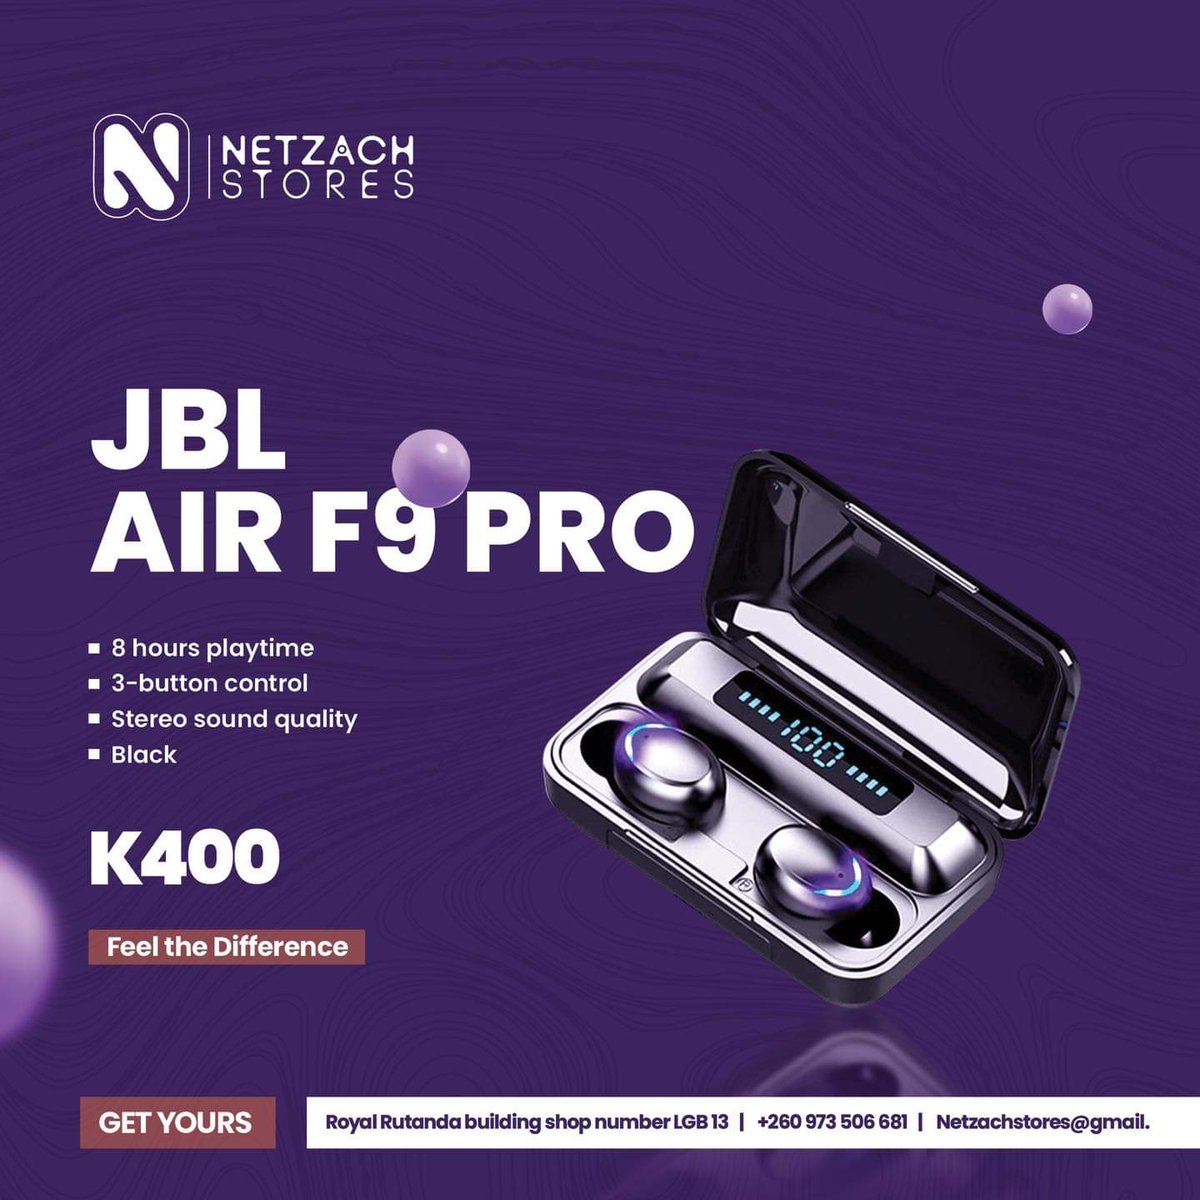 Music is medicine to the soul! Get these JBL AIR F9 PRO for that soothing music experience.

#jblairf9pro 
#netzachstores 
#feelthedifference